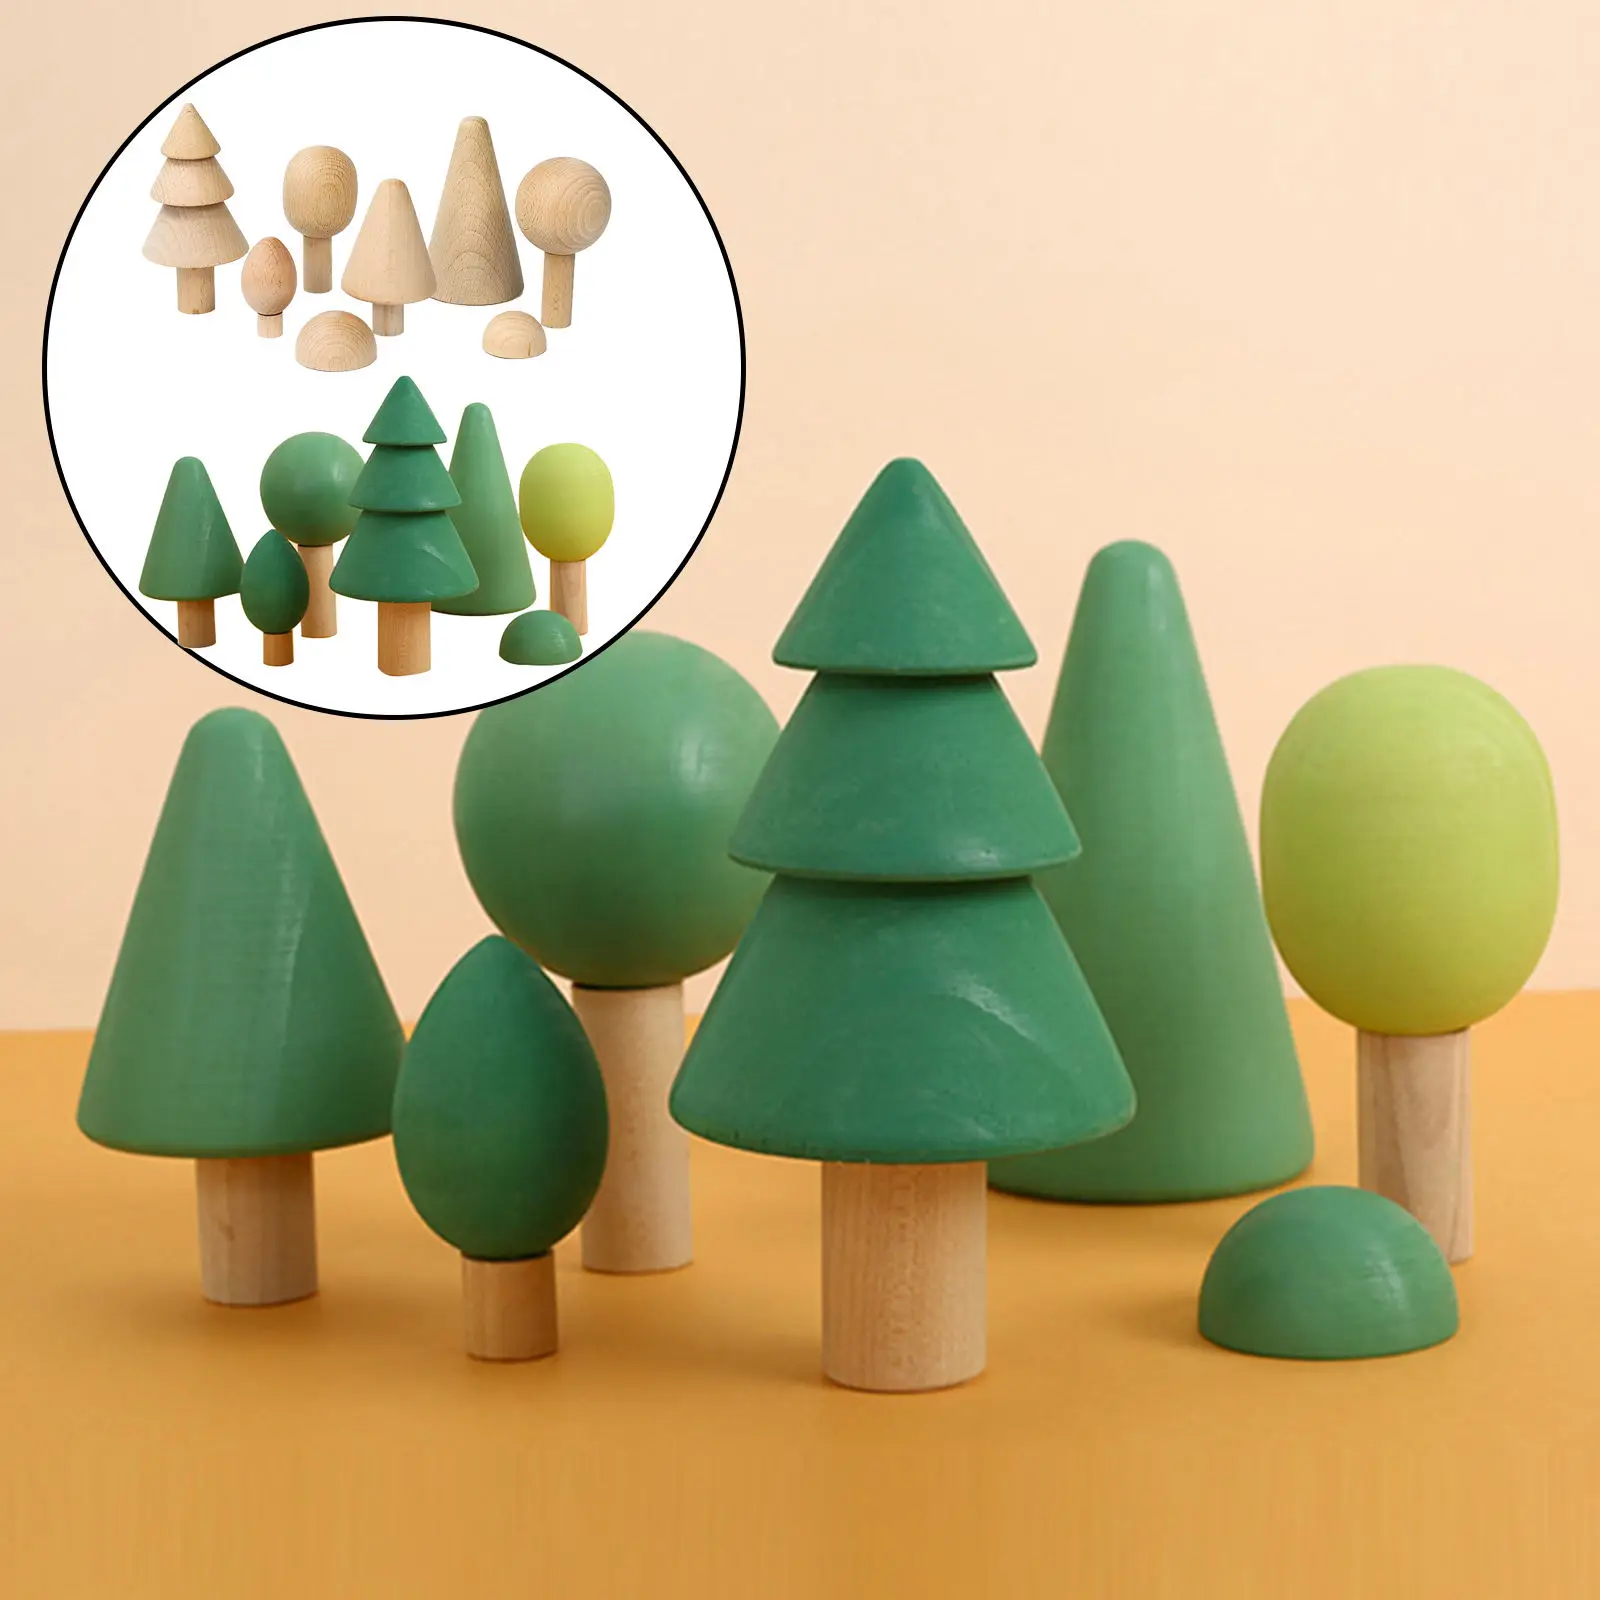 7 PCs Wooden Tree Shape Blcoks Sorting Stacking Educational Preschool Learning Toys Set for Kids 3 Years Old